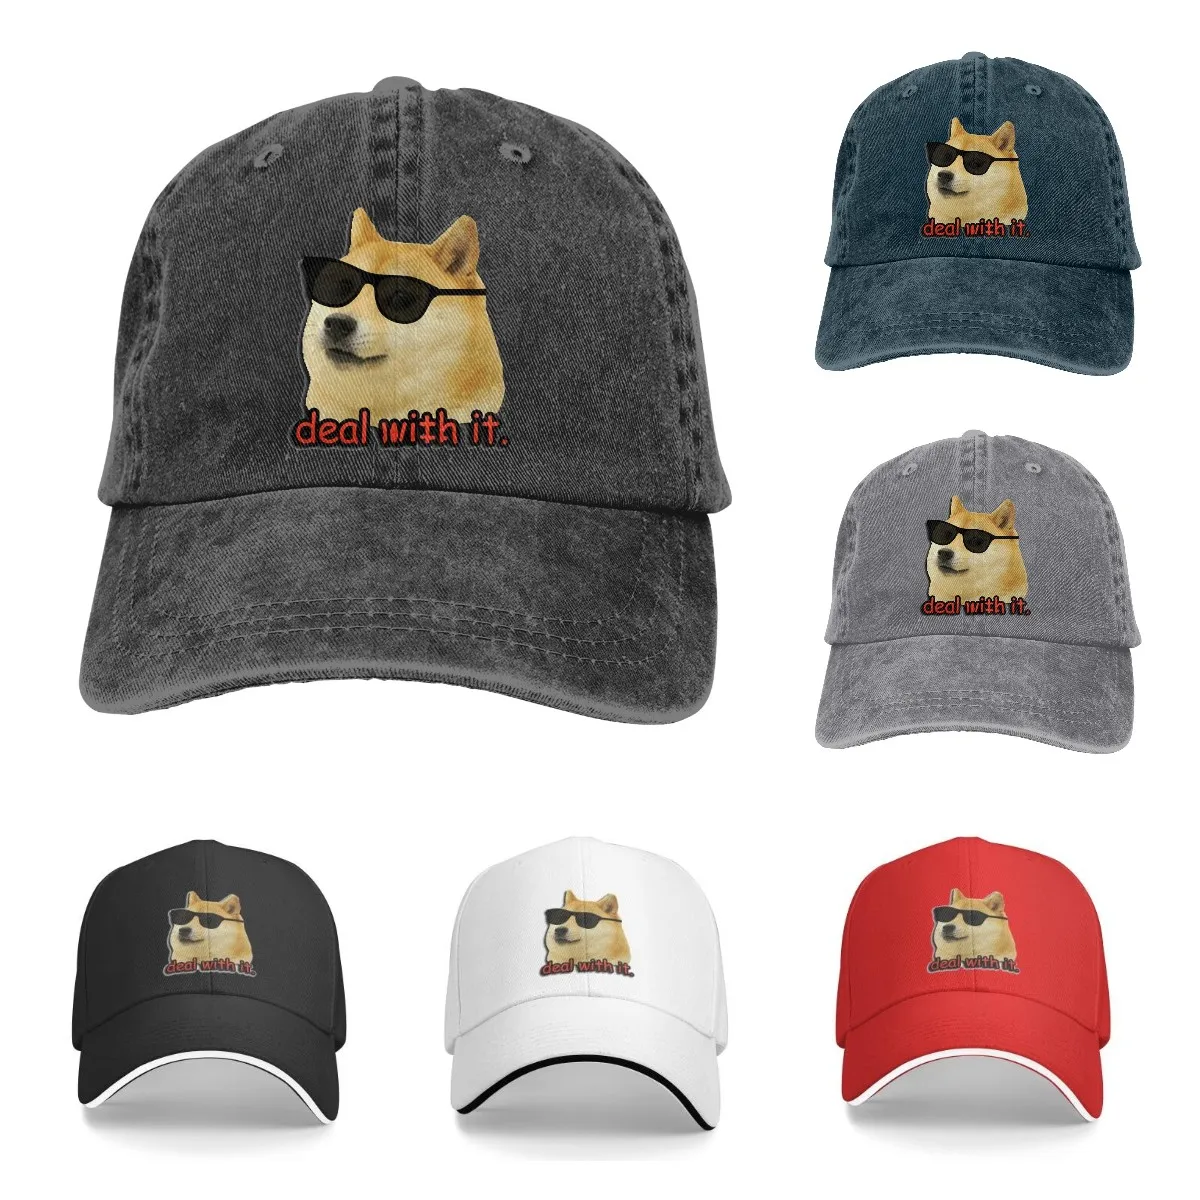 

Doge Deal With It Dog Meme The Baseball Cap Peaked capt Sport Unisex Outdoor Custom Dogecoin Funny Bitcoin Hats